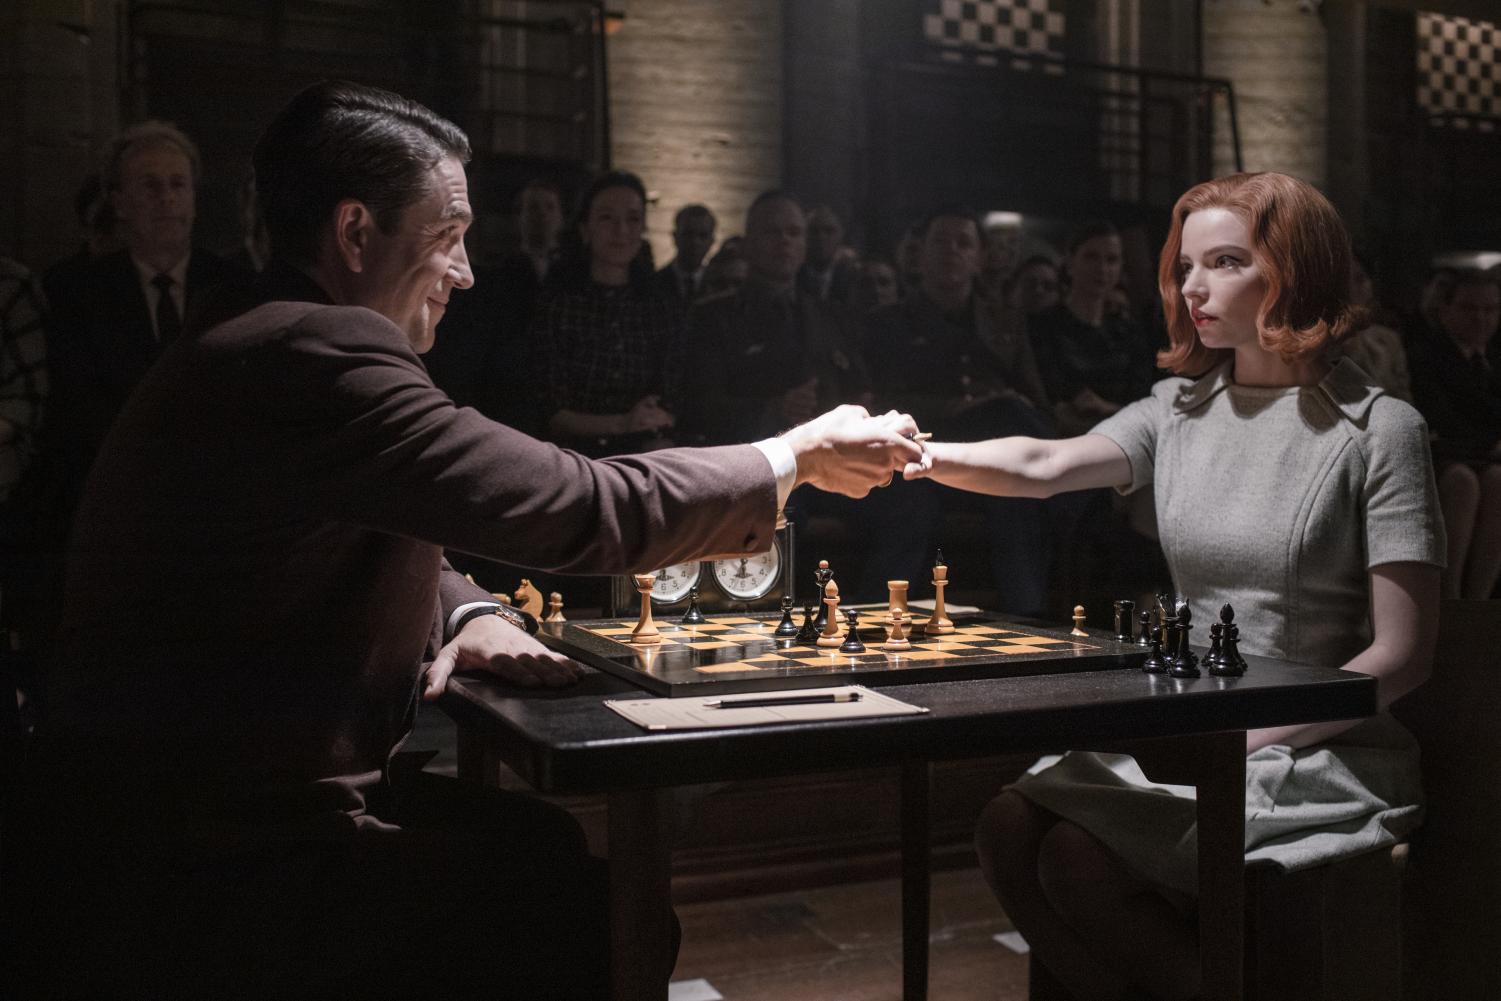 Checkmate! 10 films and TV shows featuring chess include 'The Queen's  Gambit' and 'Critical Thinking